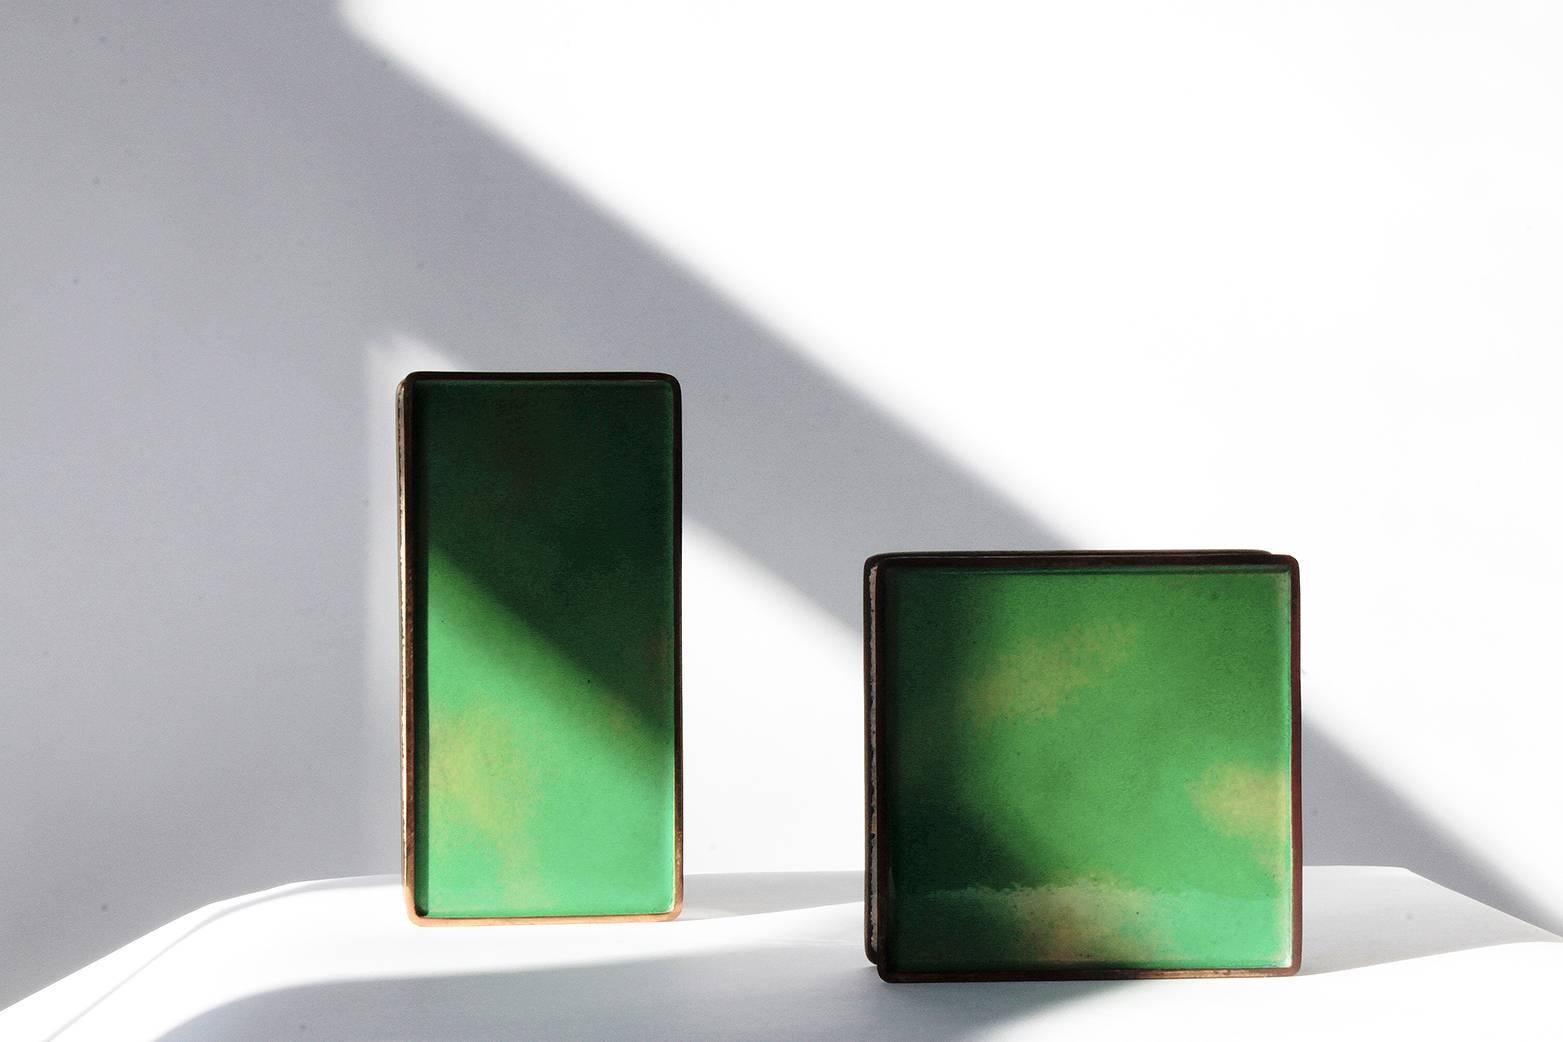 Mid-20th Century Gio Ponti Door Handles with Hand-Polished Enamel on Brass by Paolo De Poli